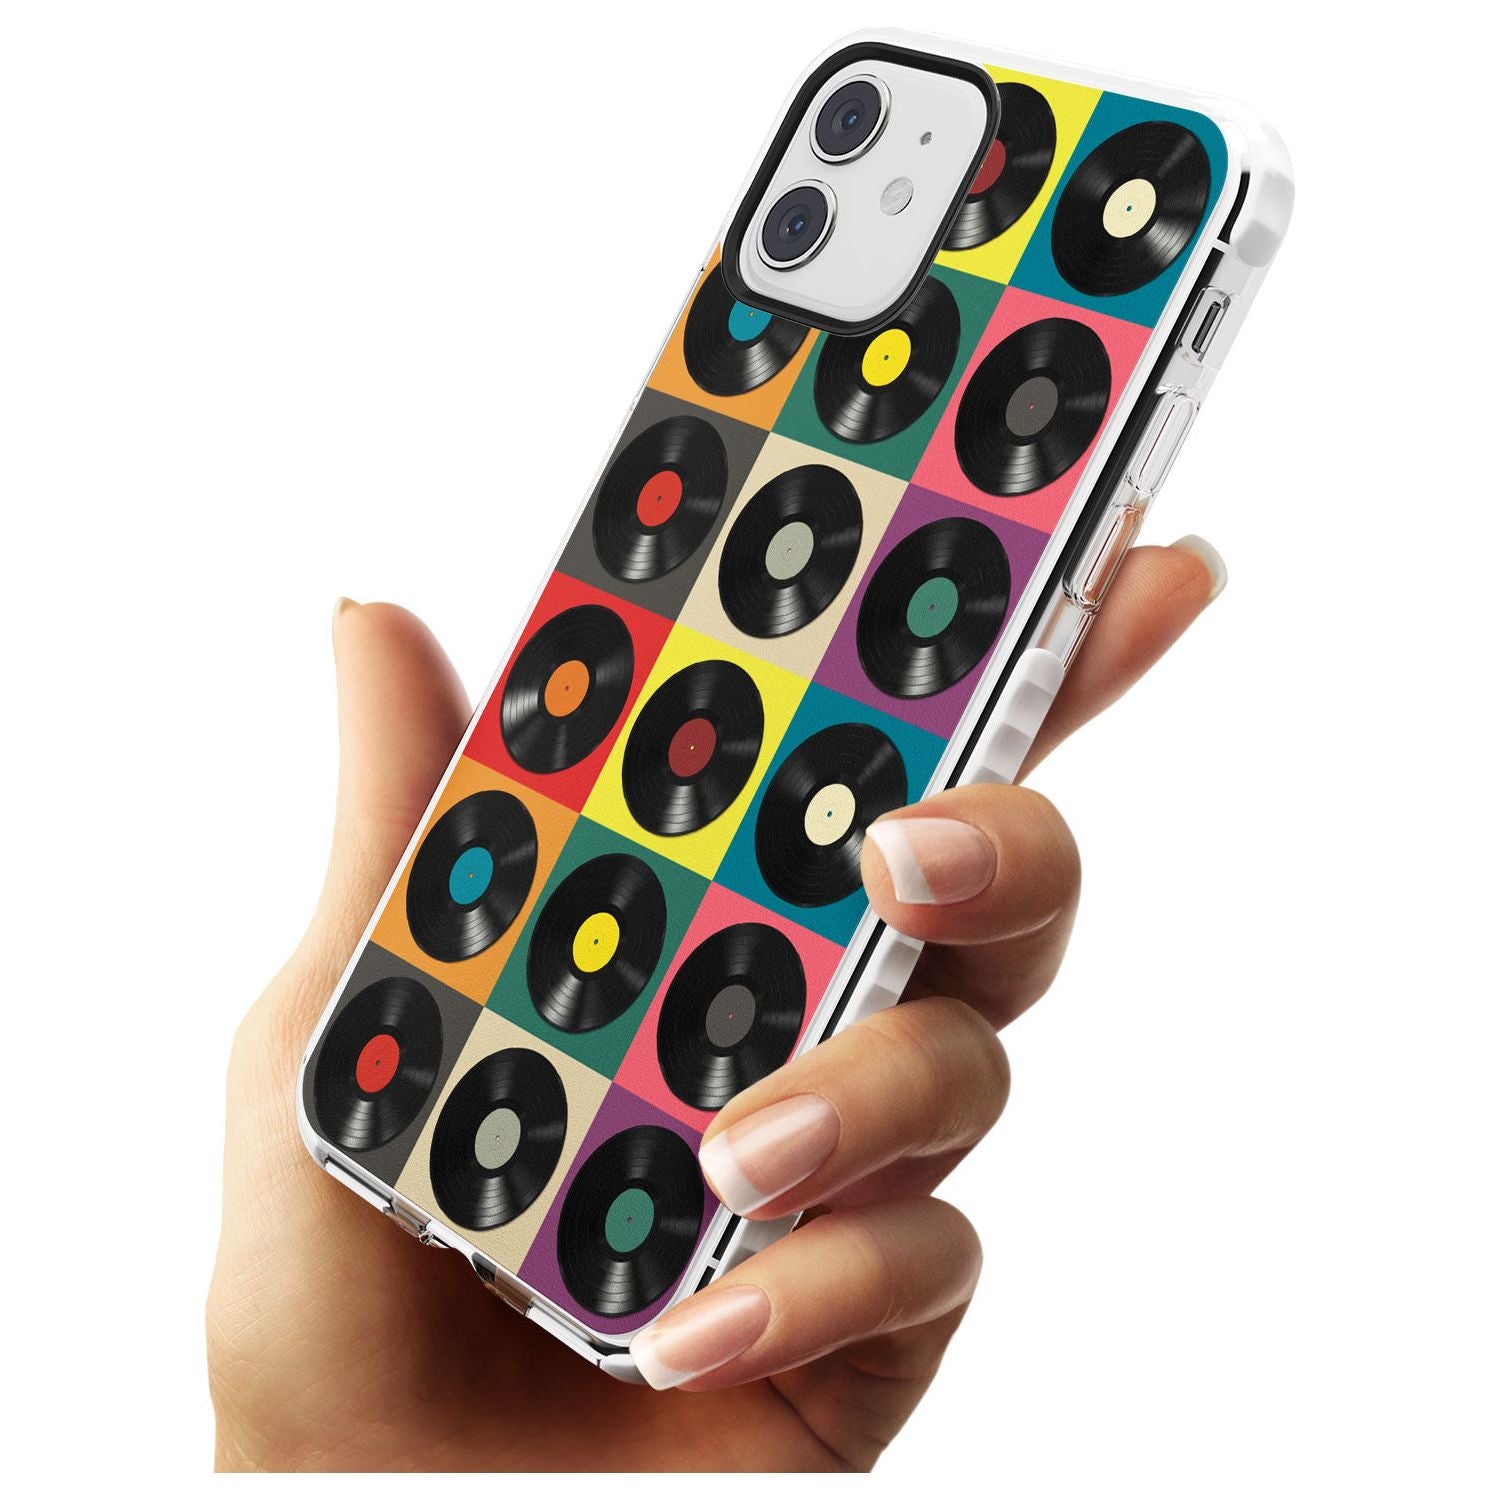 Vinyl Record Pattern Impact Phone Case for iPhone 11